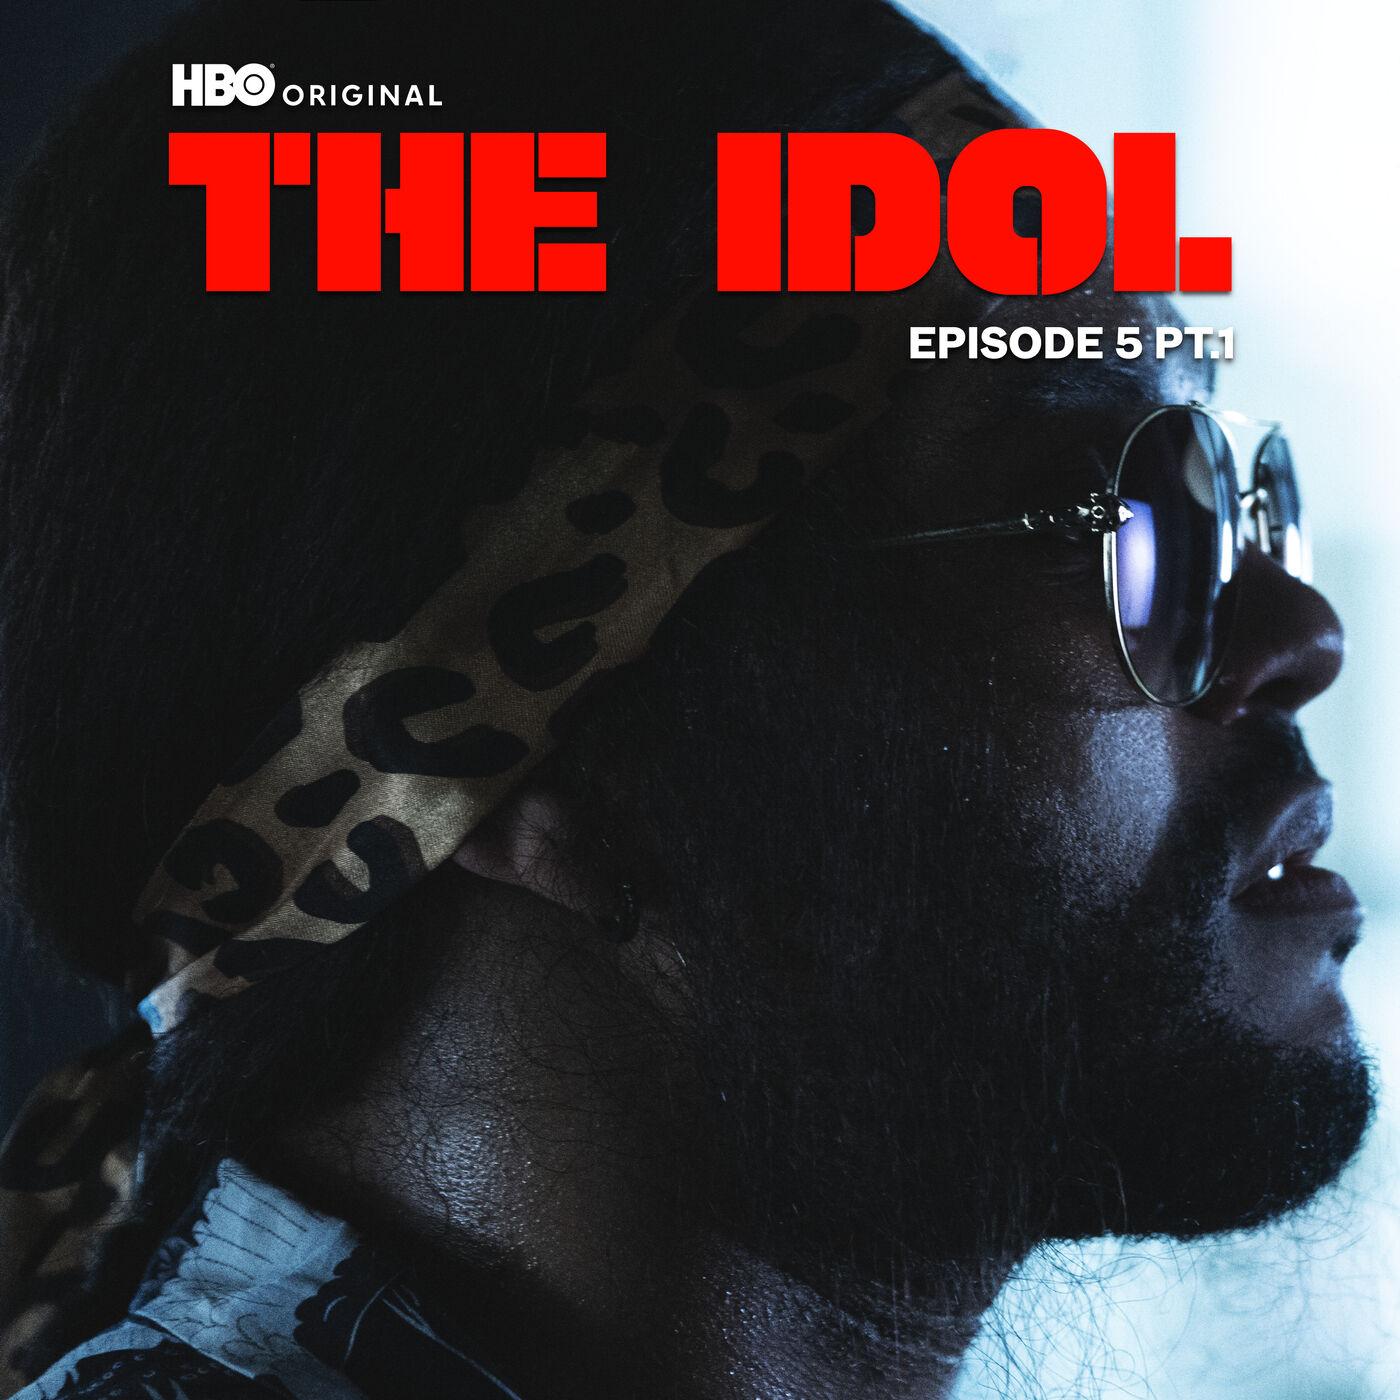 The Weeknd – The Idol Episode 5 Part 1 (Music from the HBO Original Series)【44.1kHz／16bit】美国区-OppsUpro音乐帝国